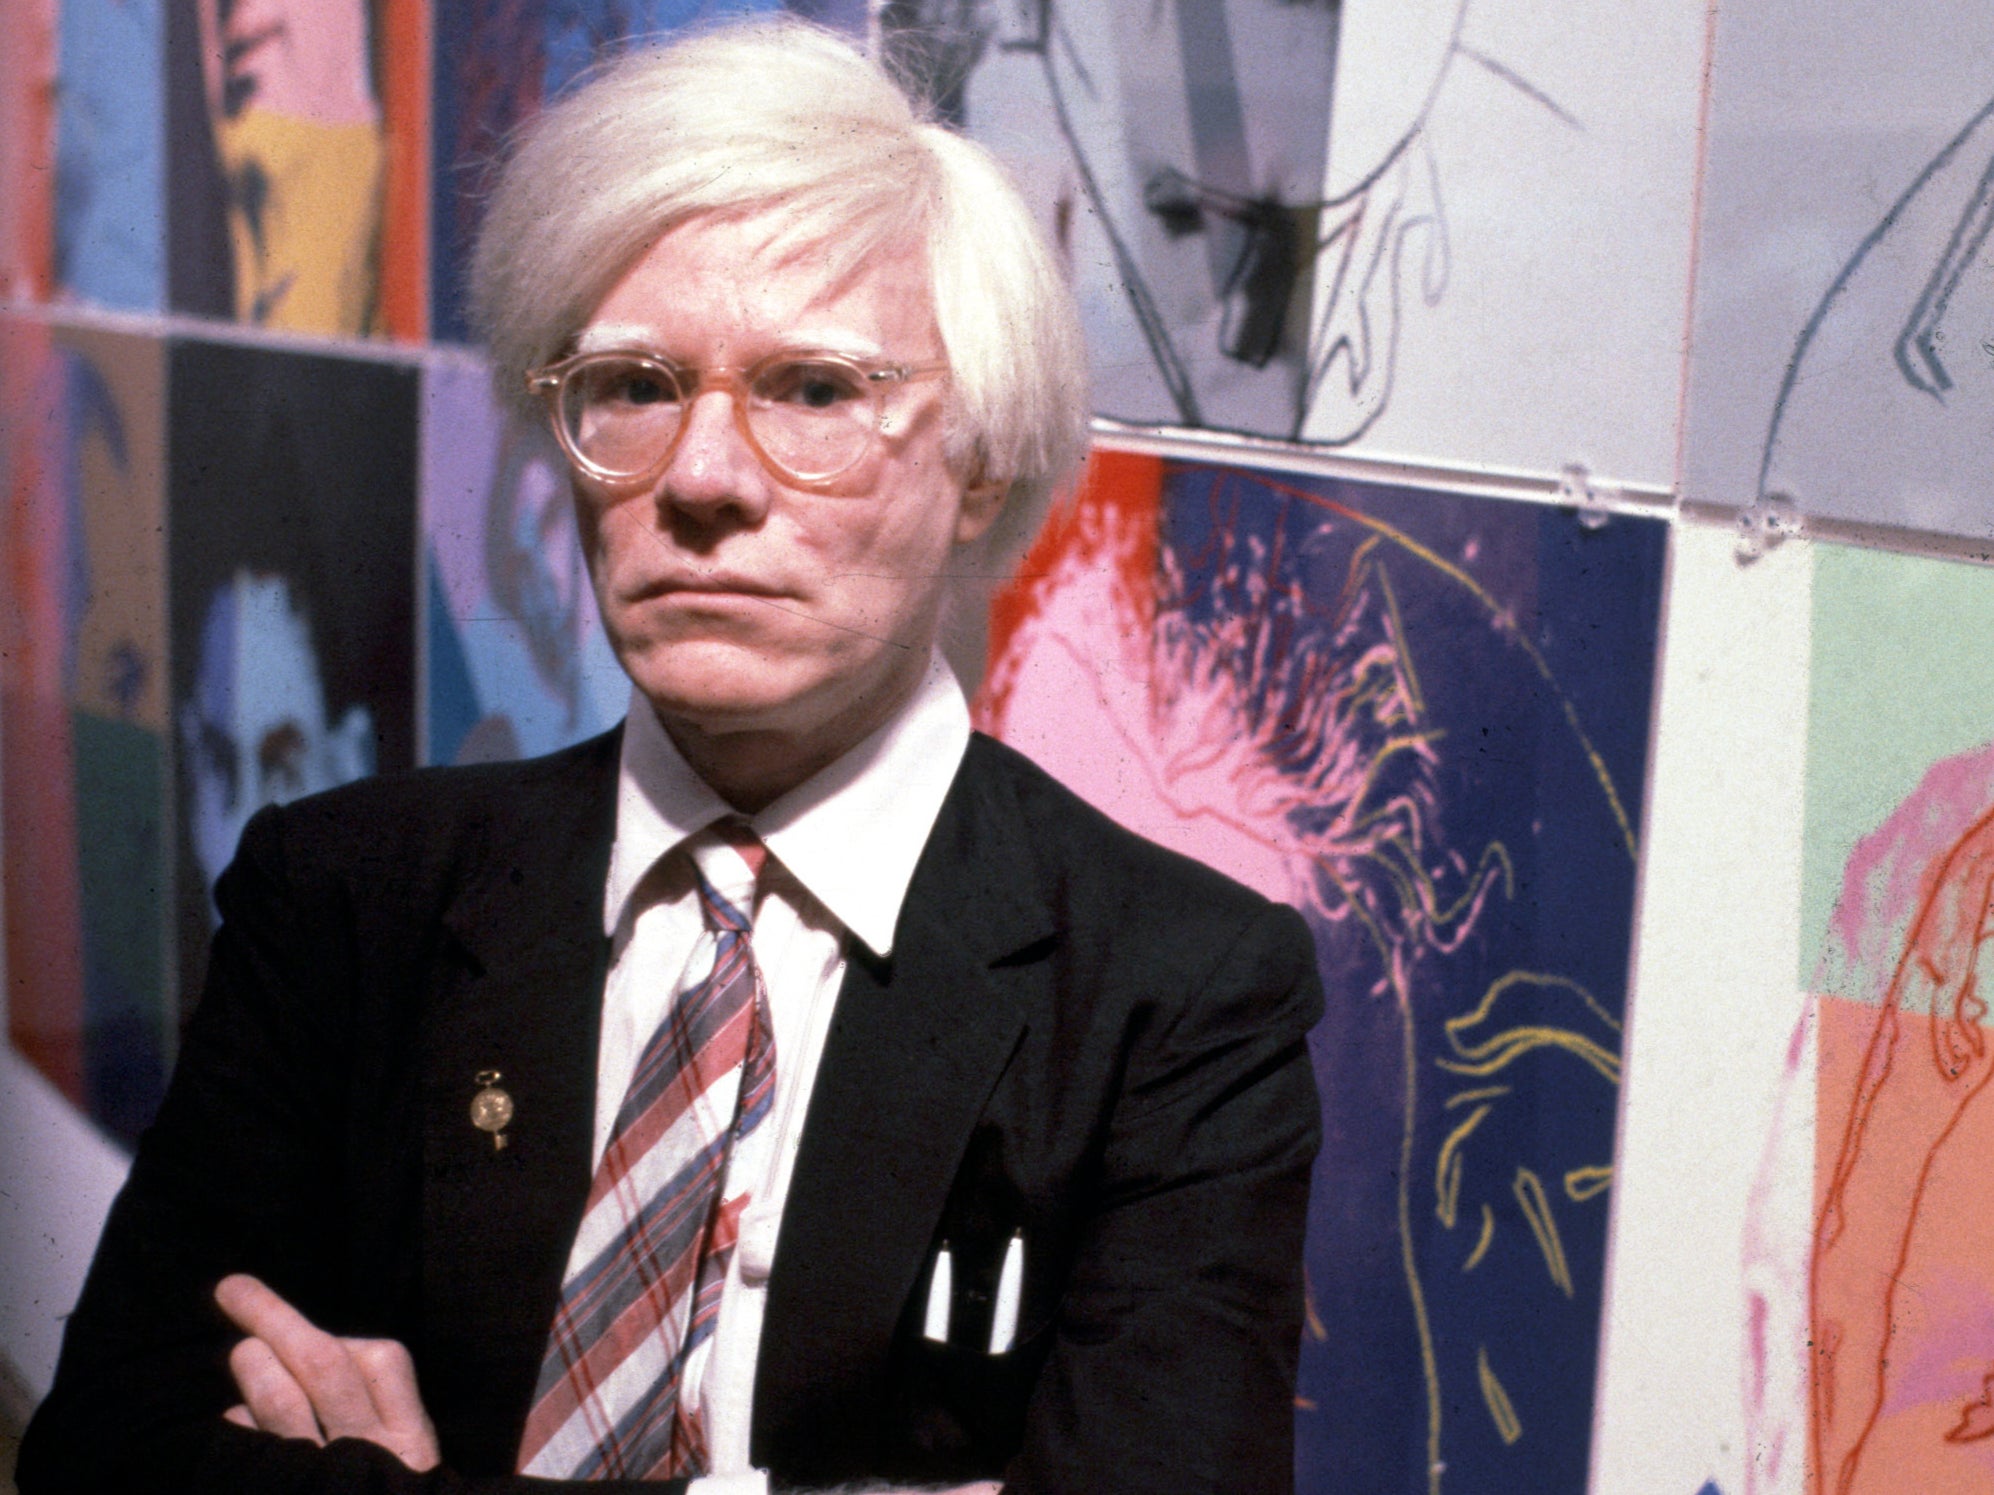 Andy Warhol with some of his works on 15 December 1980